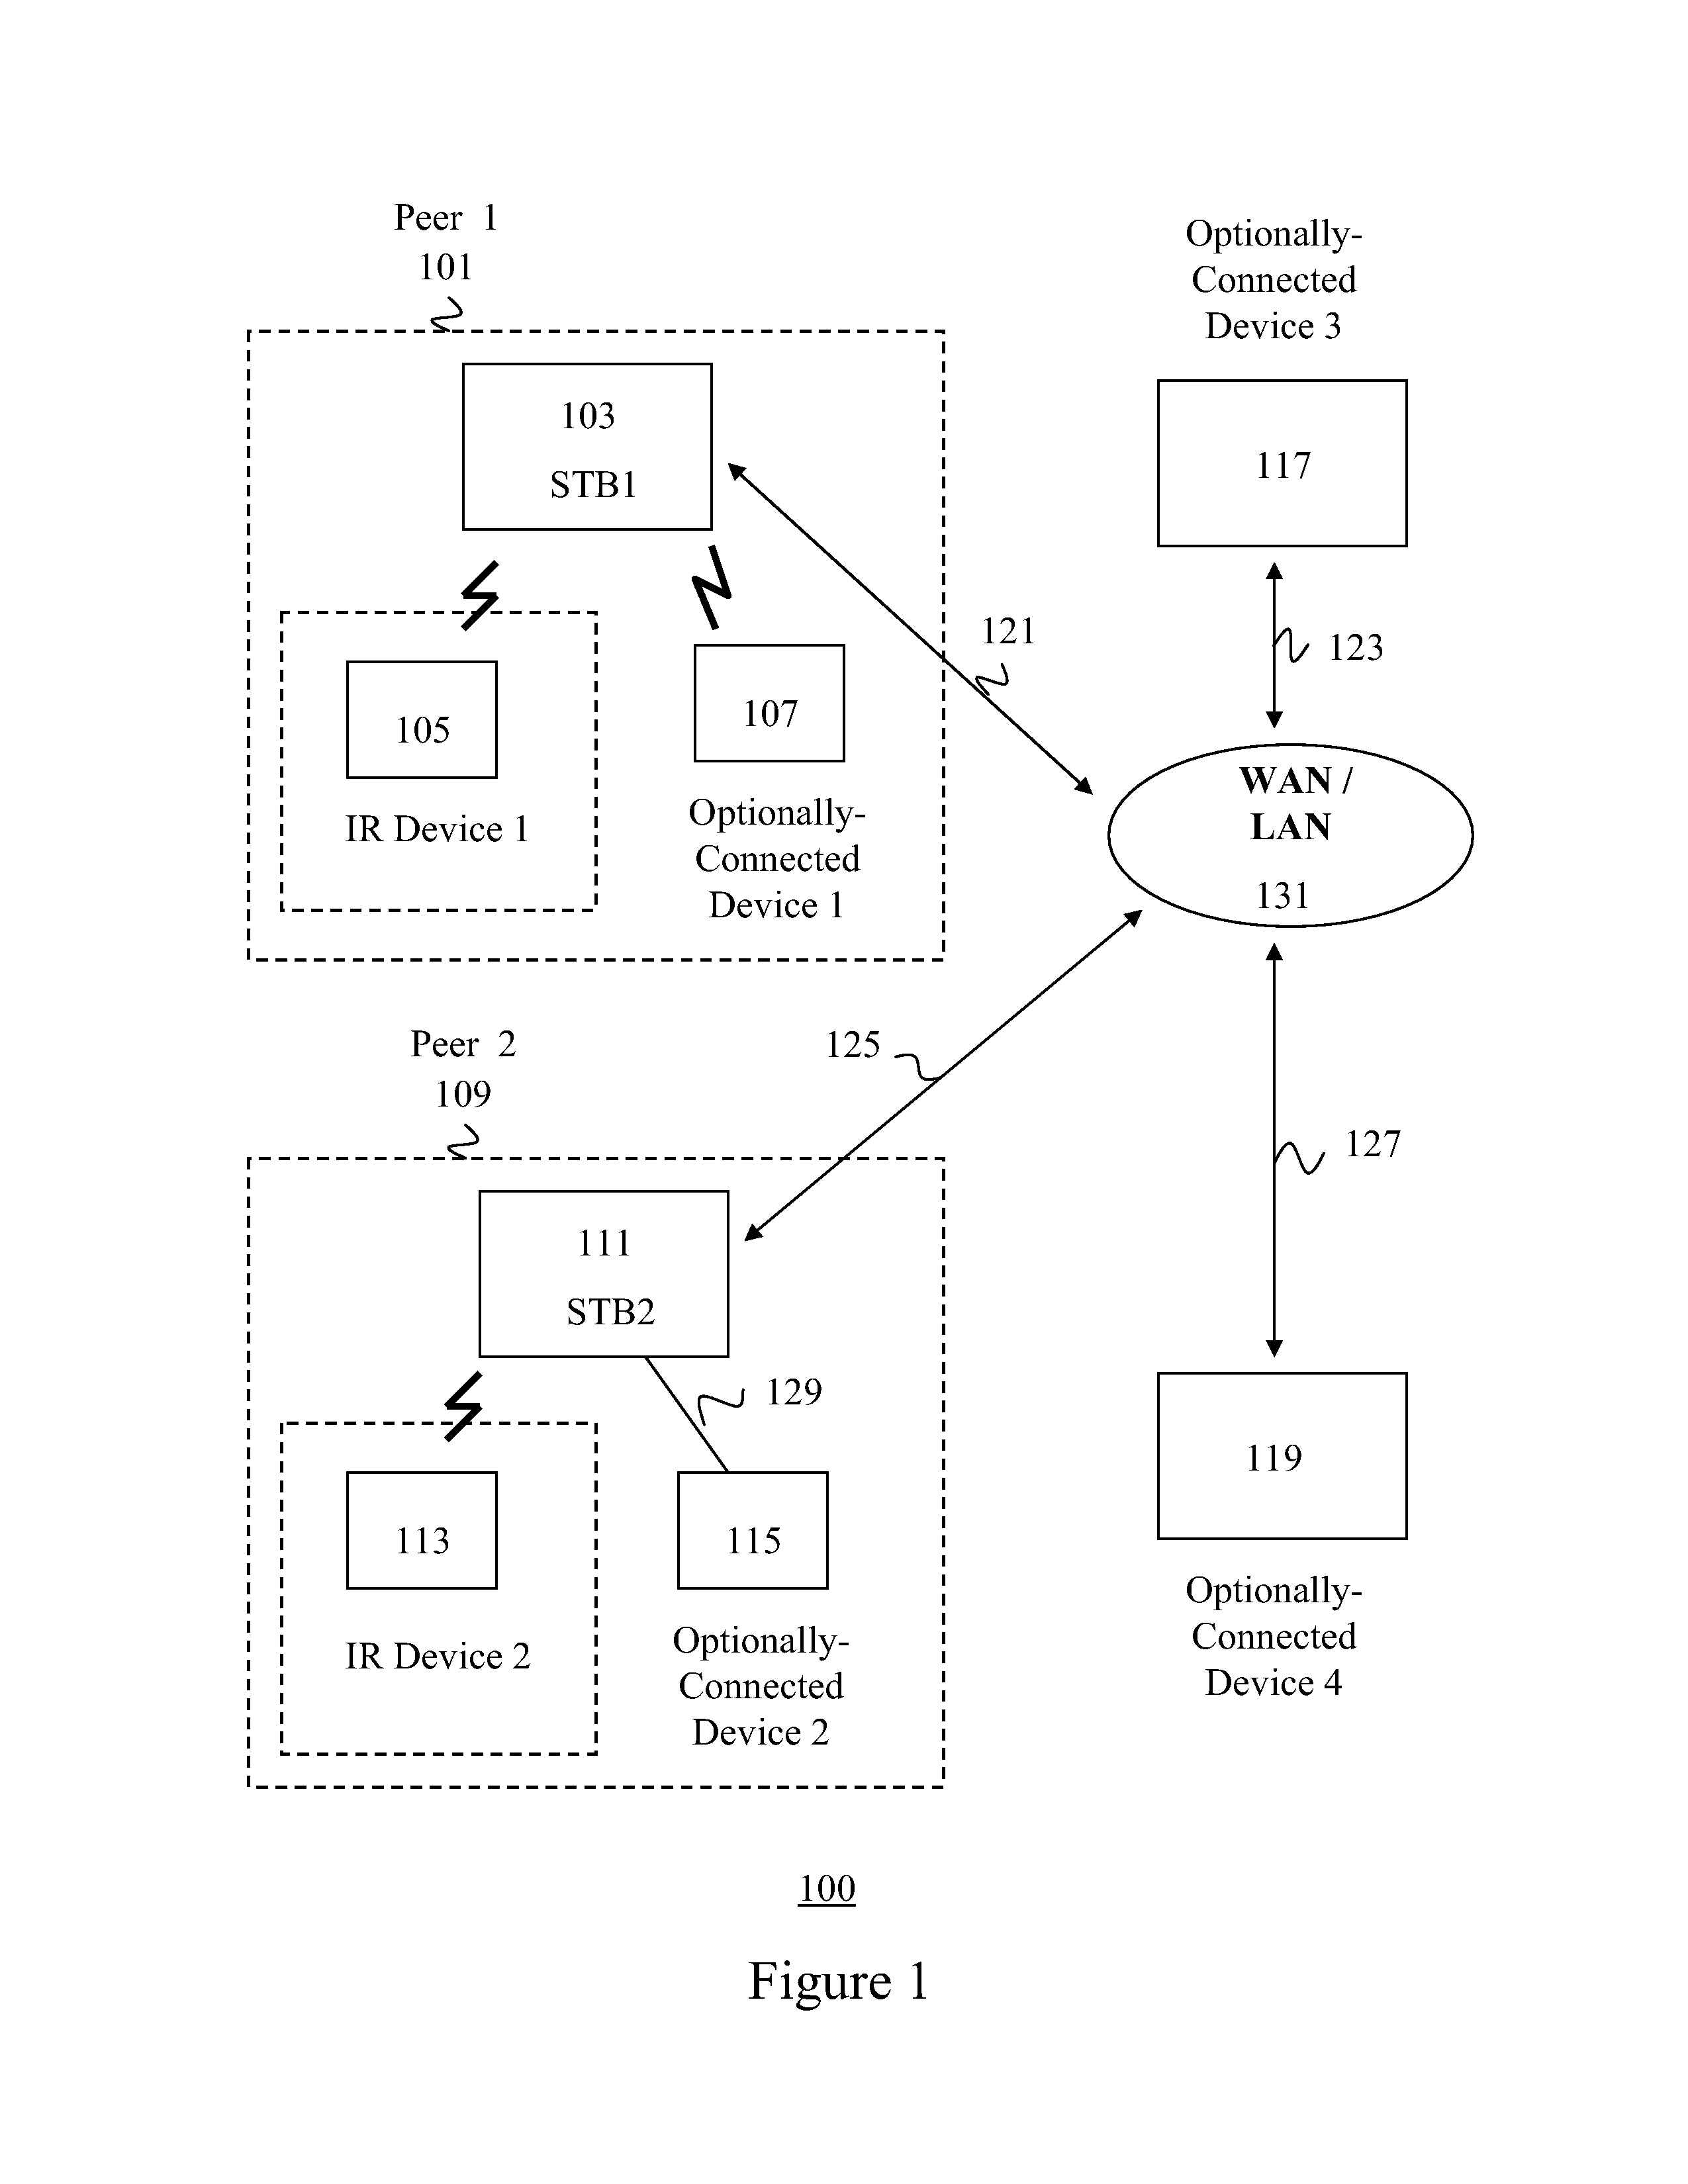 Apparatus and method for controlling a network-connected device in one peer network from an infrared device connected to another peer network using tcp/ip and infrared signals